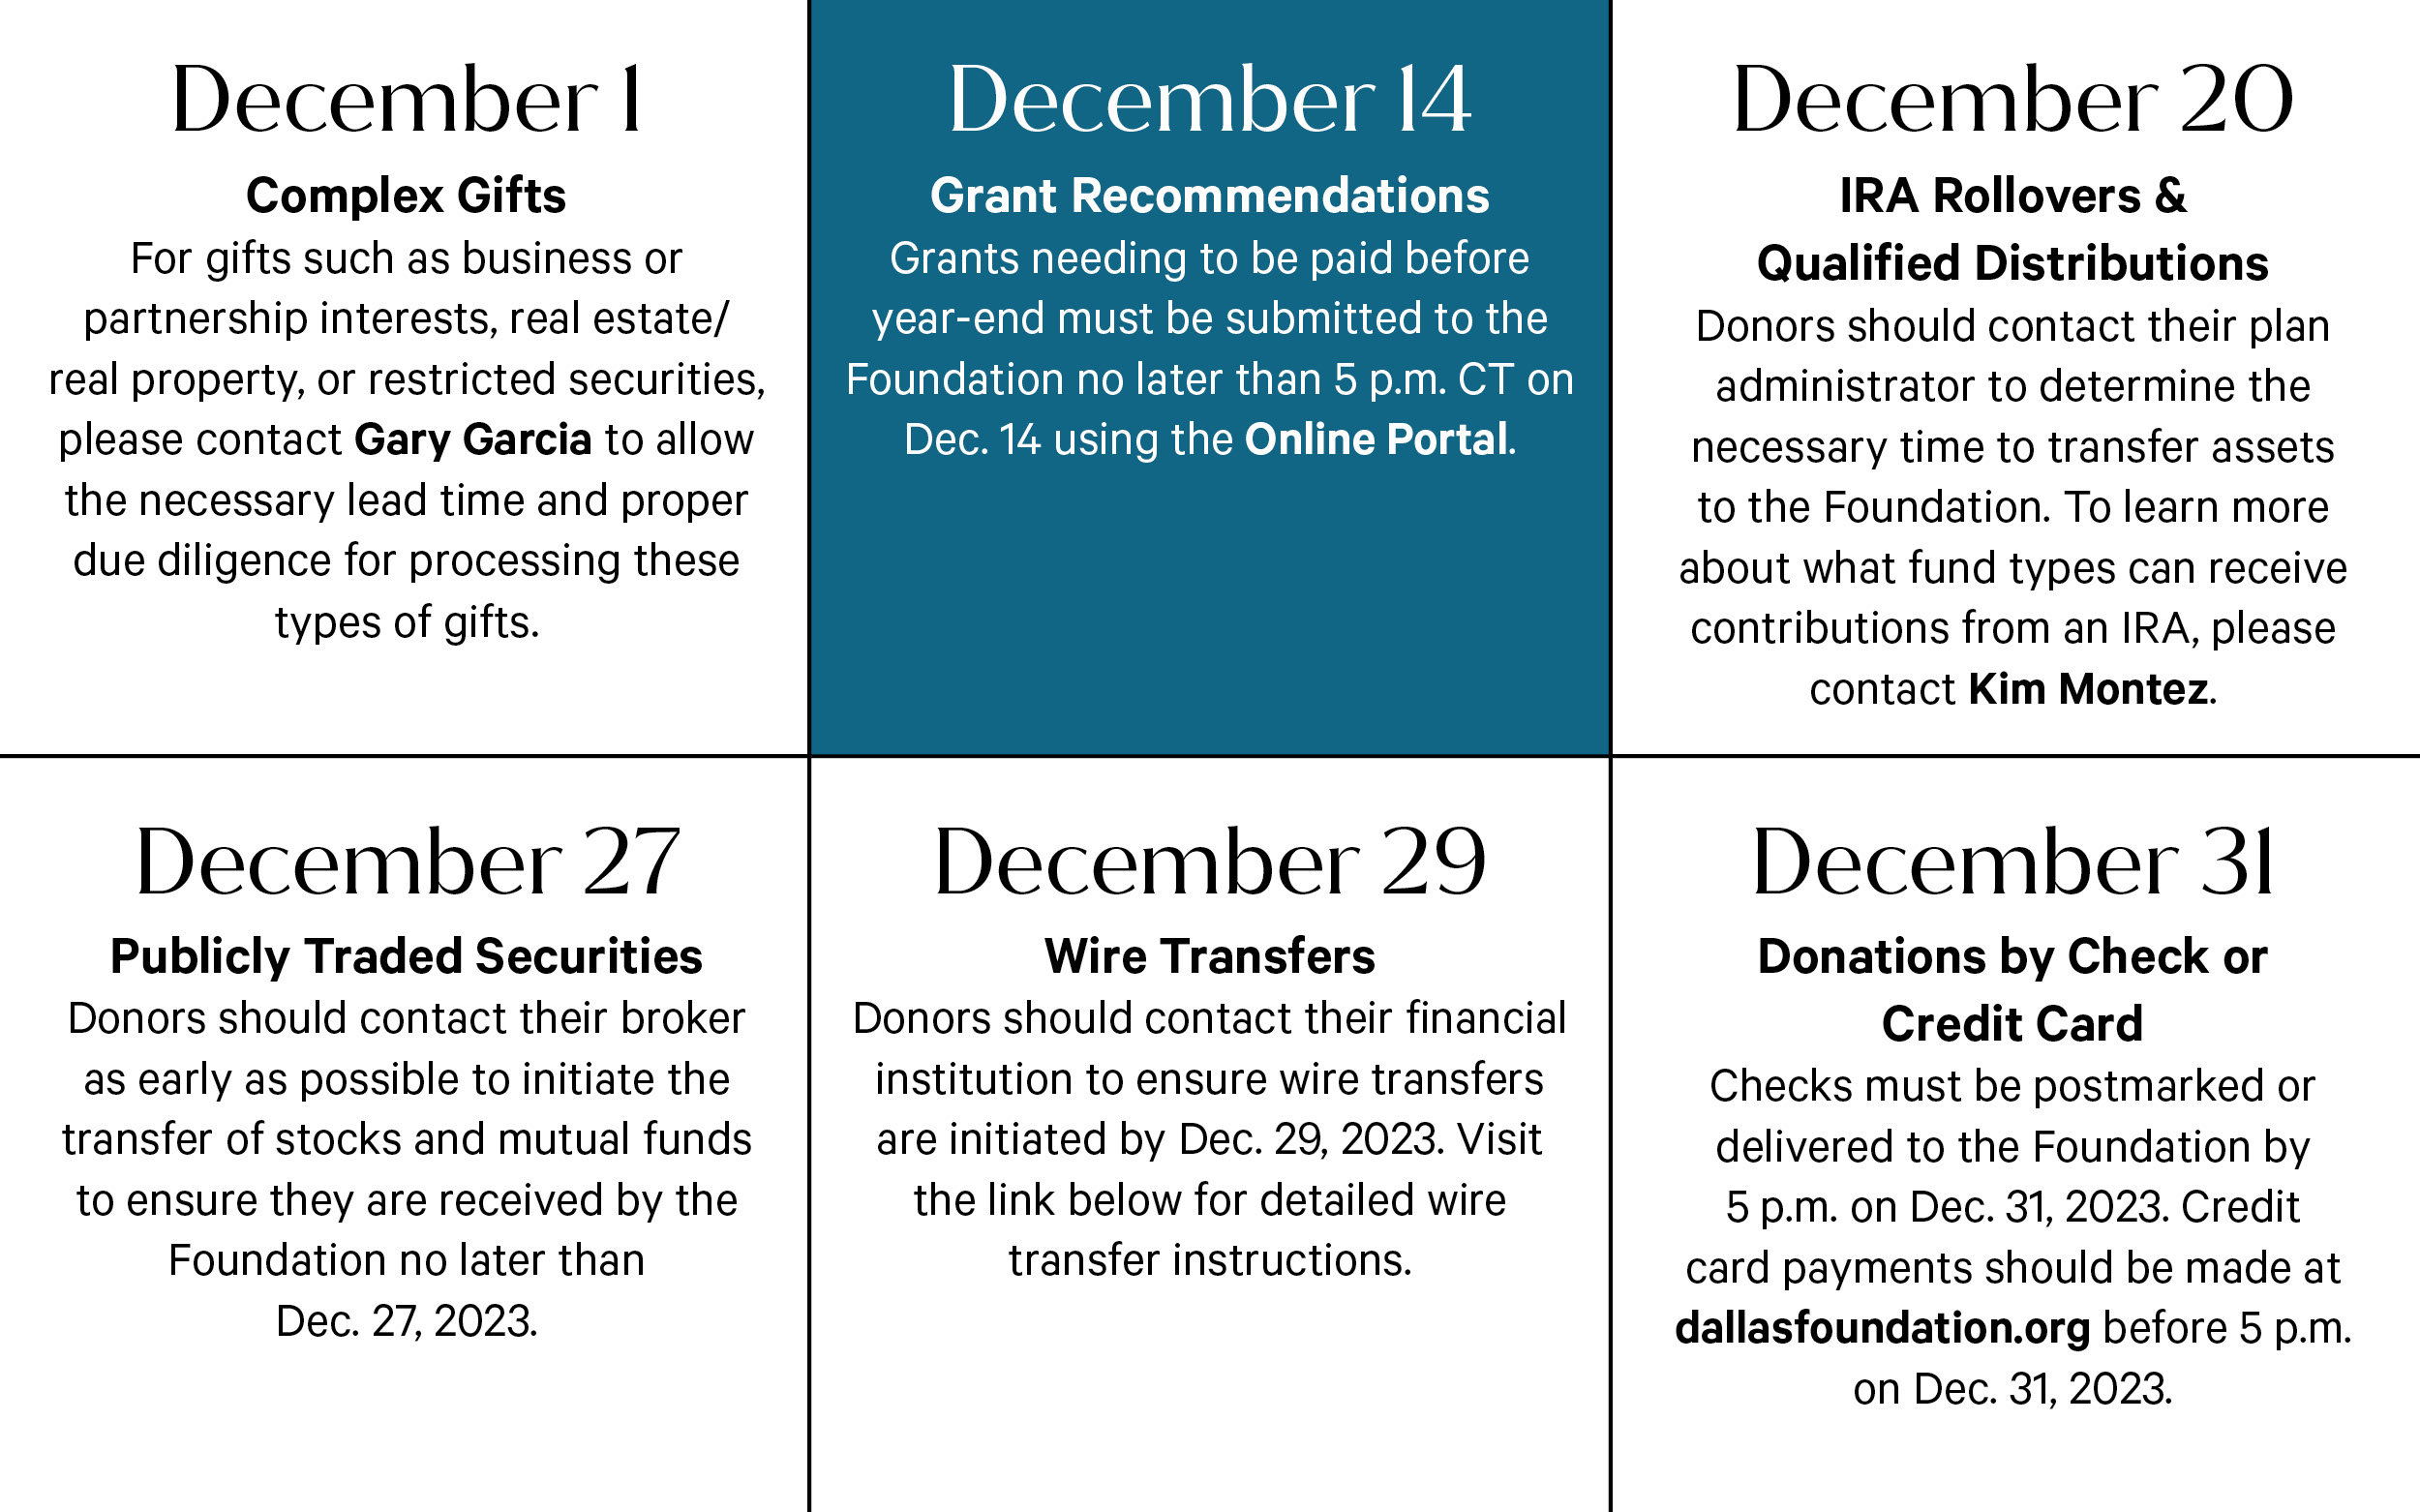 Please note the following year-end deadlines for grants and contributions to the Foundation: December 1 – Complex Gifts December 14 – Grant Recommendations Due December 20 – IRA Rollovers & Qualified Distributions December 27 – Publicly Traded Securities December 29 – Wire Transfers December 31 – Donations by Check or Credit Card